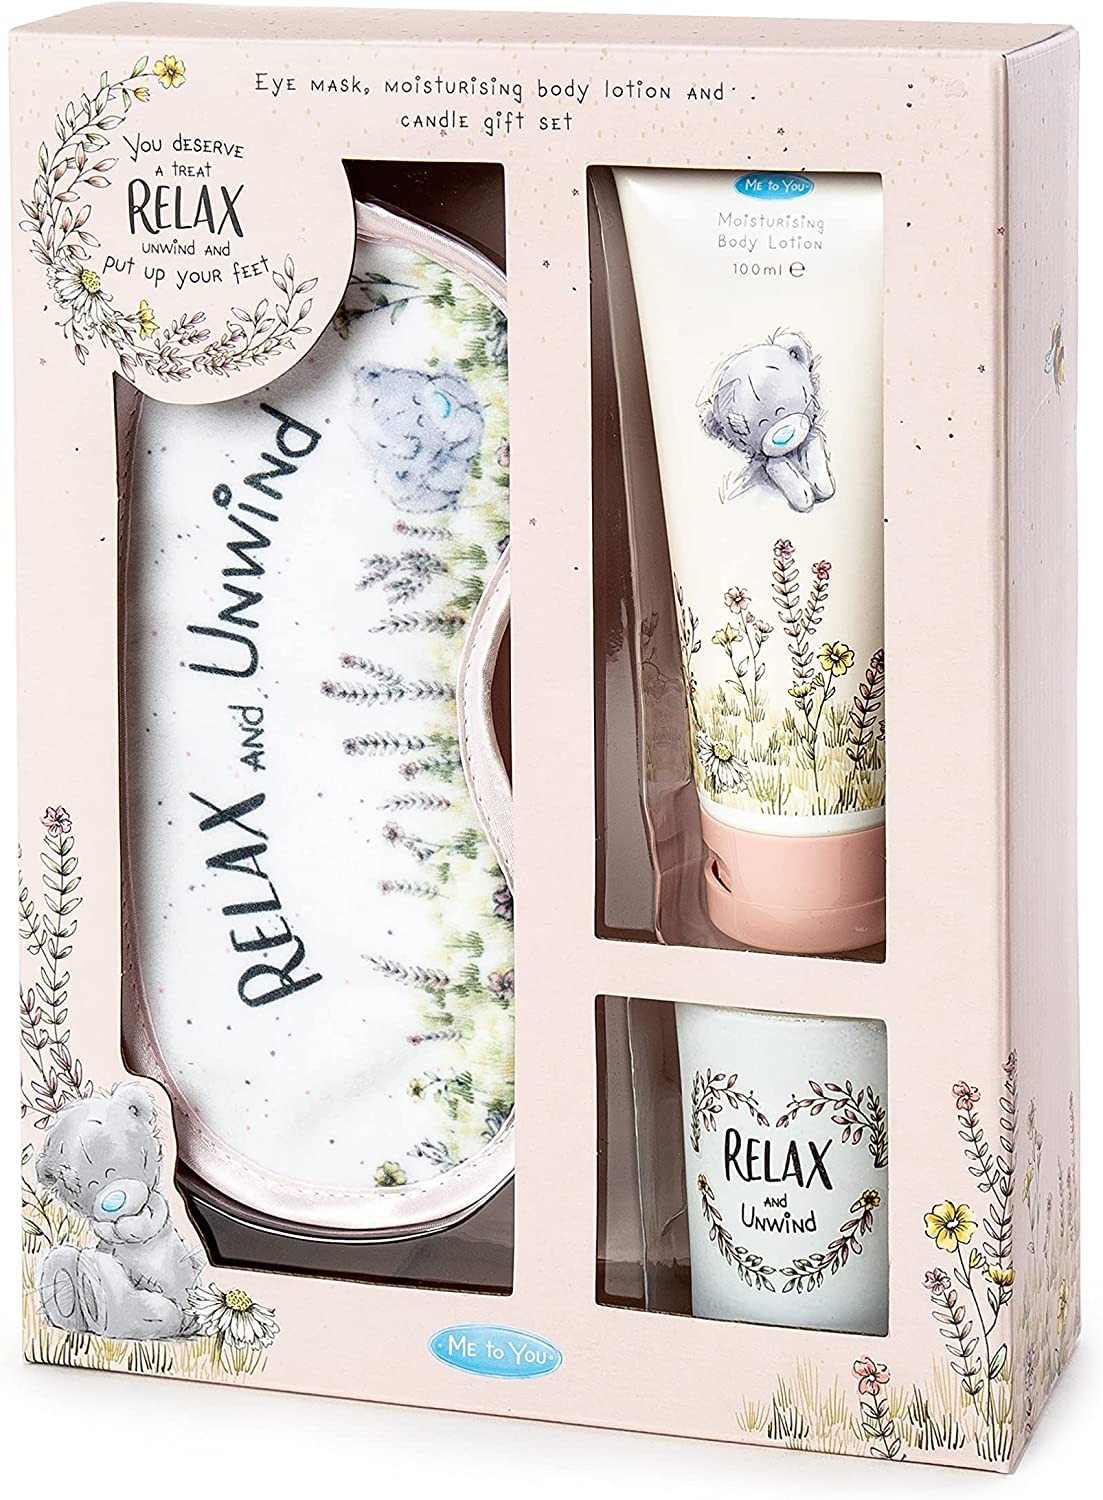 Me to You Relax & Unwind Gift Set